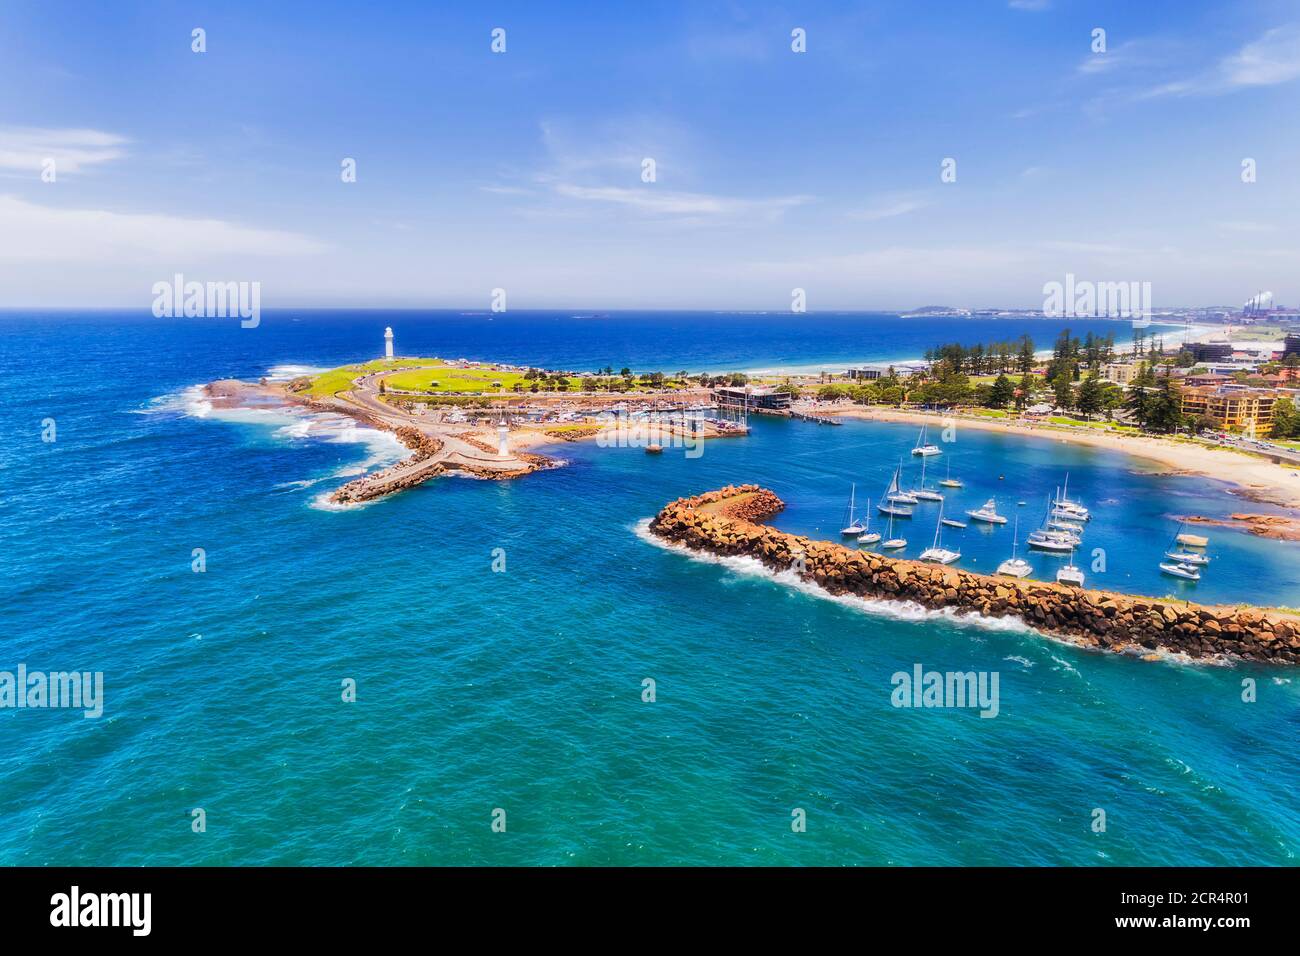 Aerial view of Wollongong city harbour with lighthouses and breakwater wall protecting marina and beaches. Stock Photo